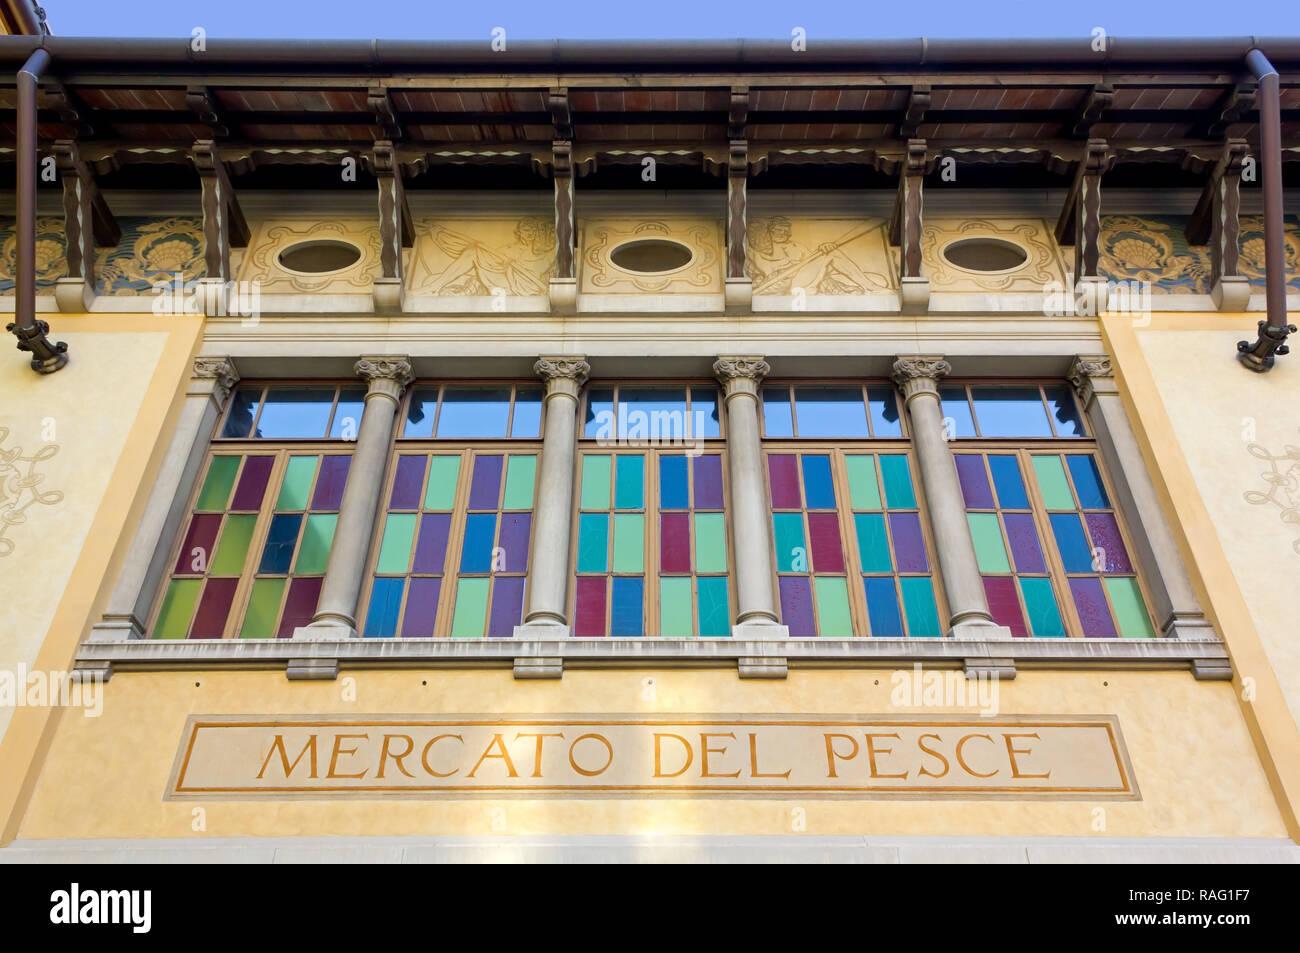 Facade of the former fish market, now public exhibition gallery. The italian text on the wall reads "Fish Market". Stock Photo